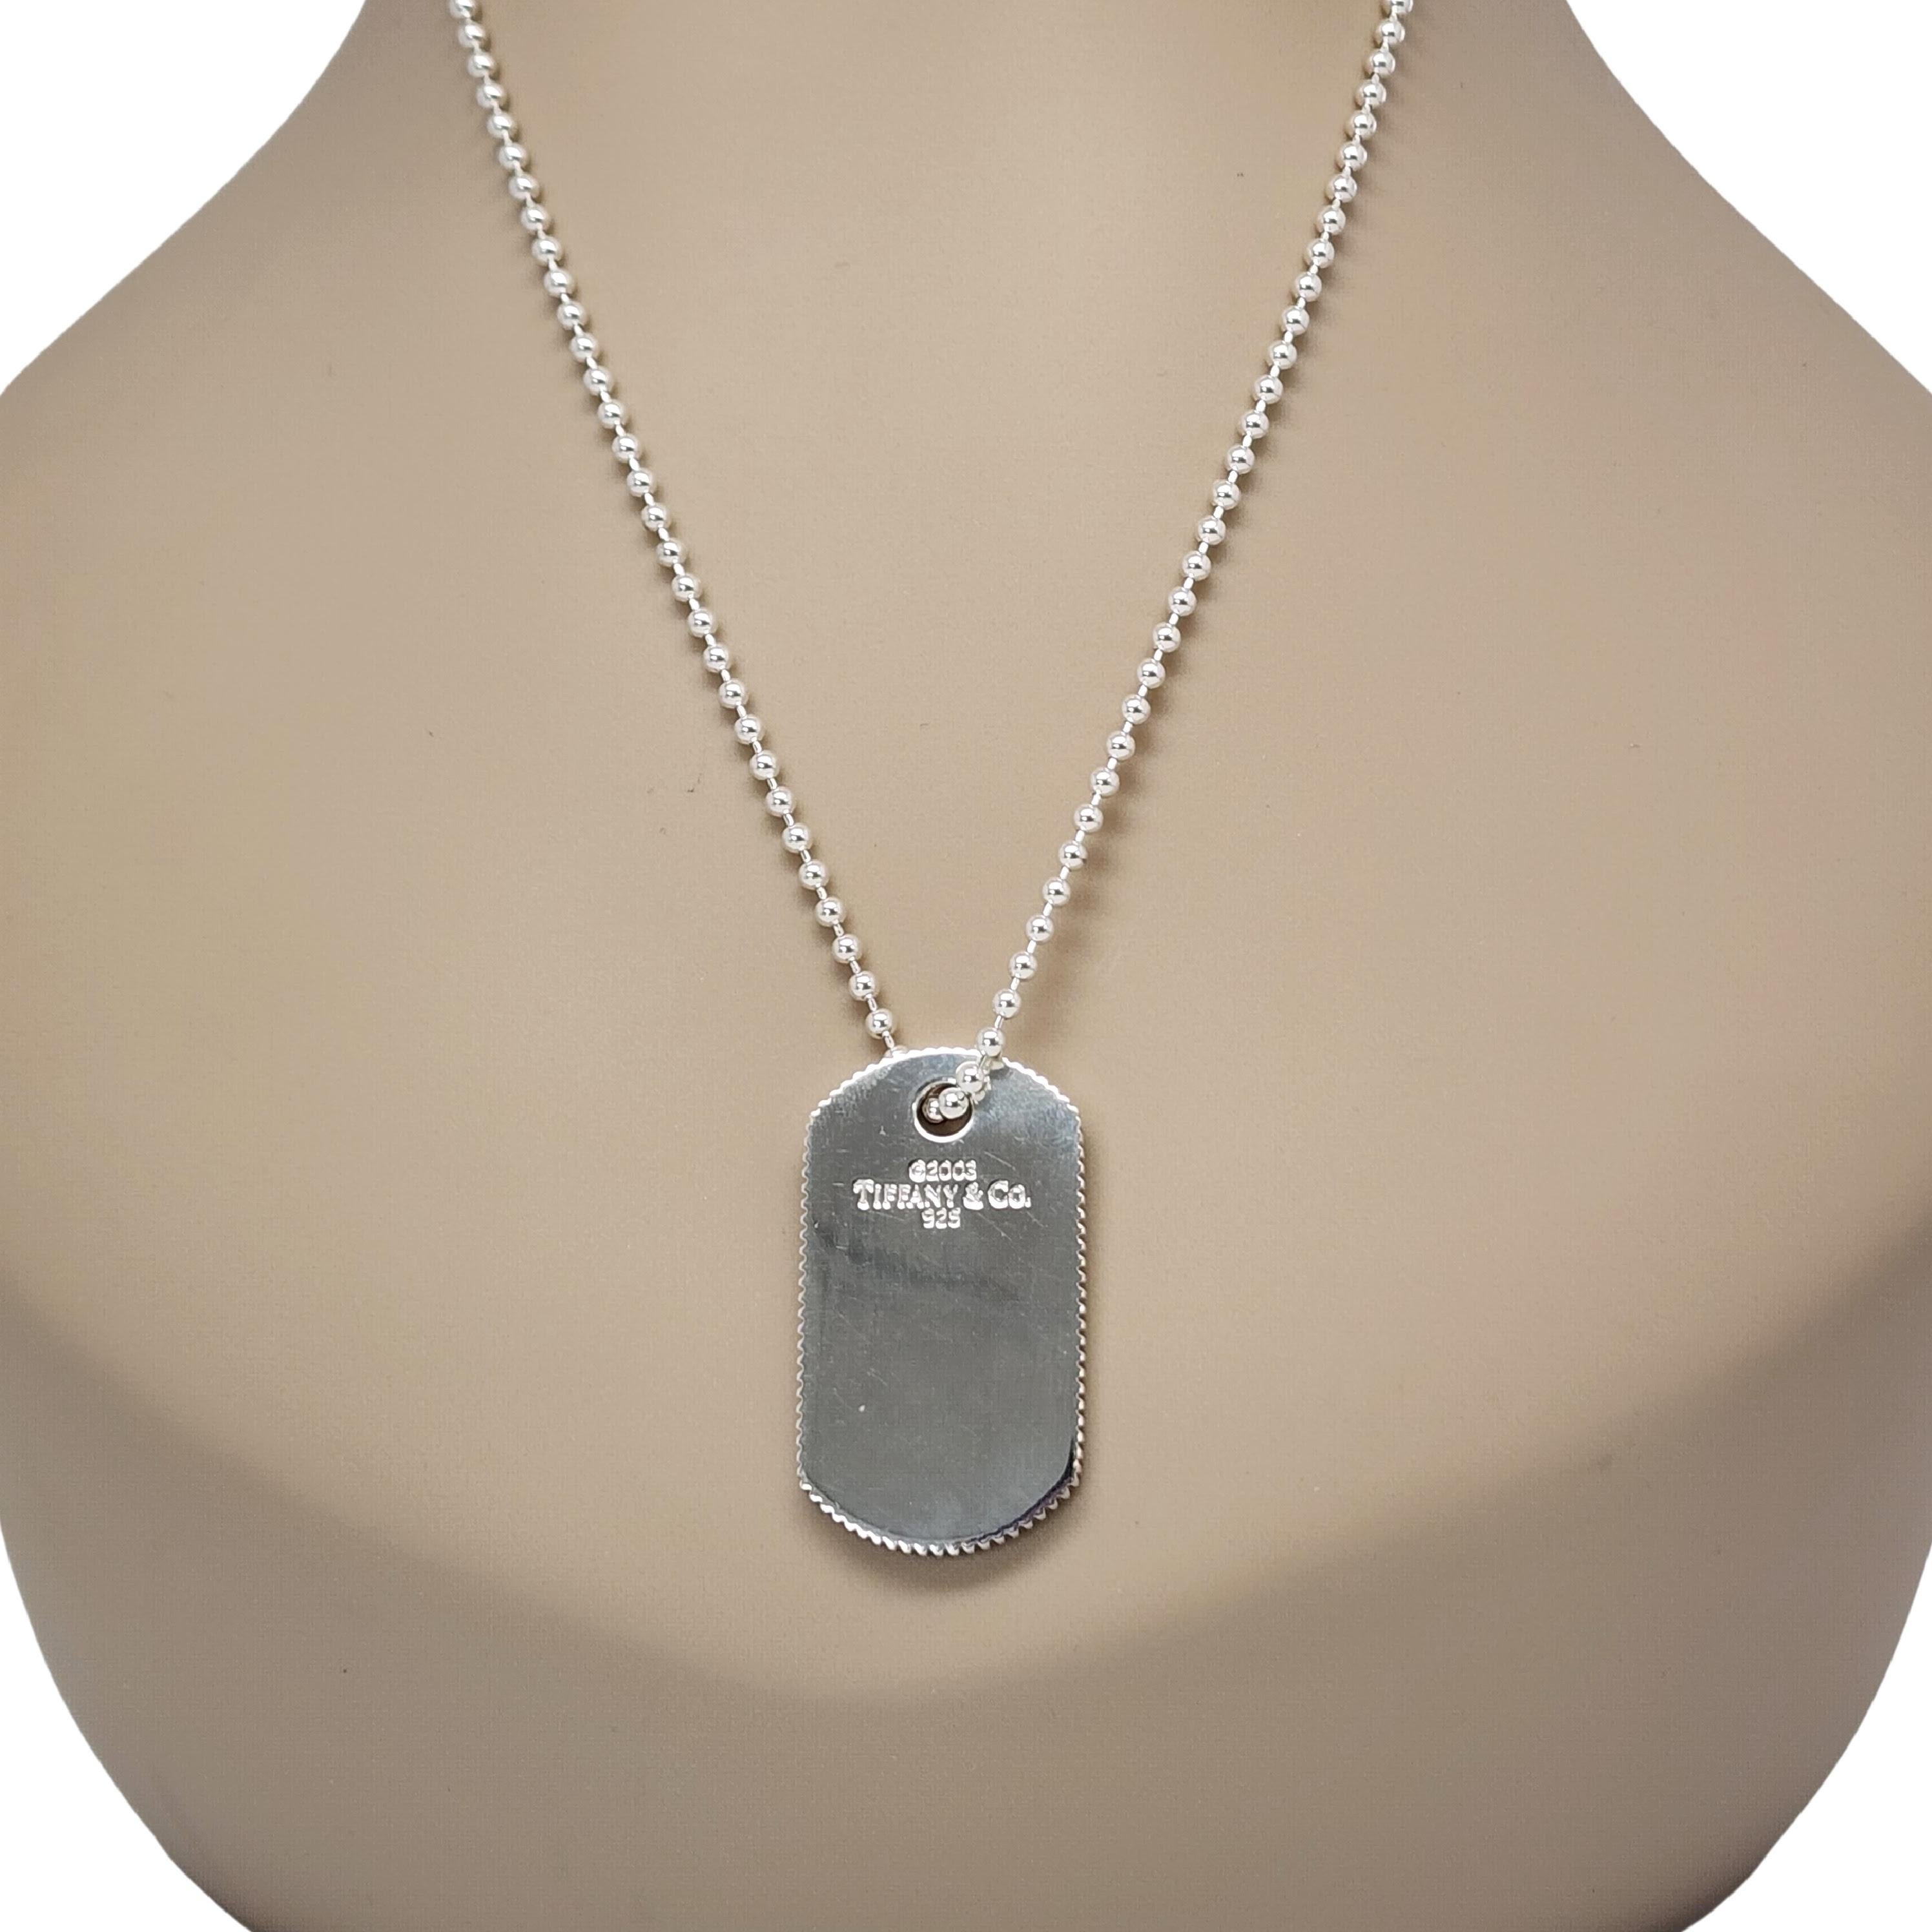 Sterling silver beaded ball chain with dog tag pendant by Tiffany & Co.

Authentic Tiffany 